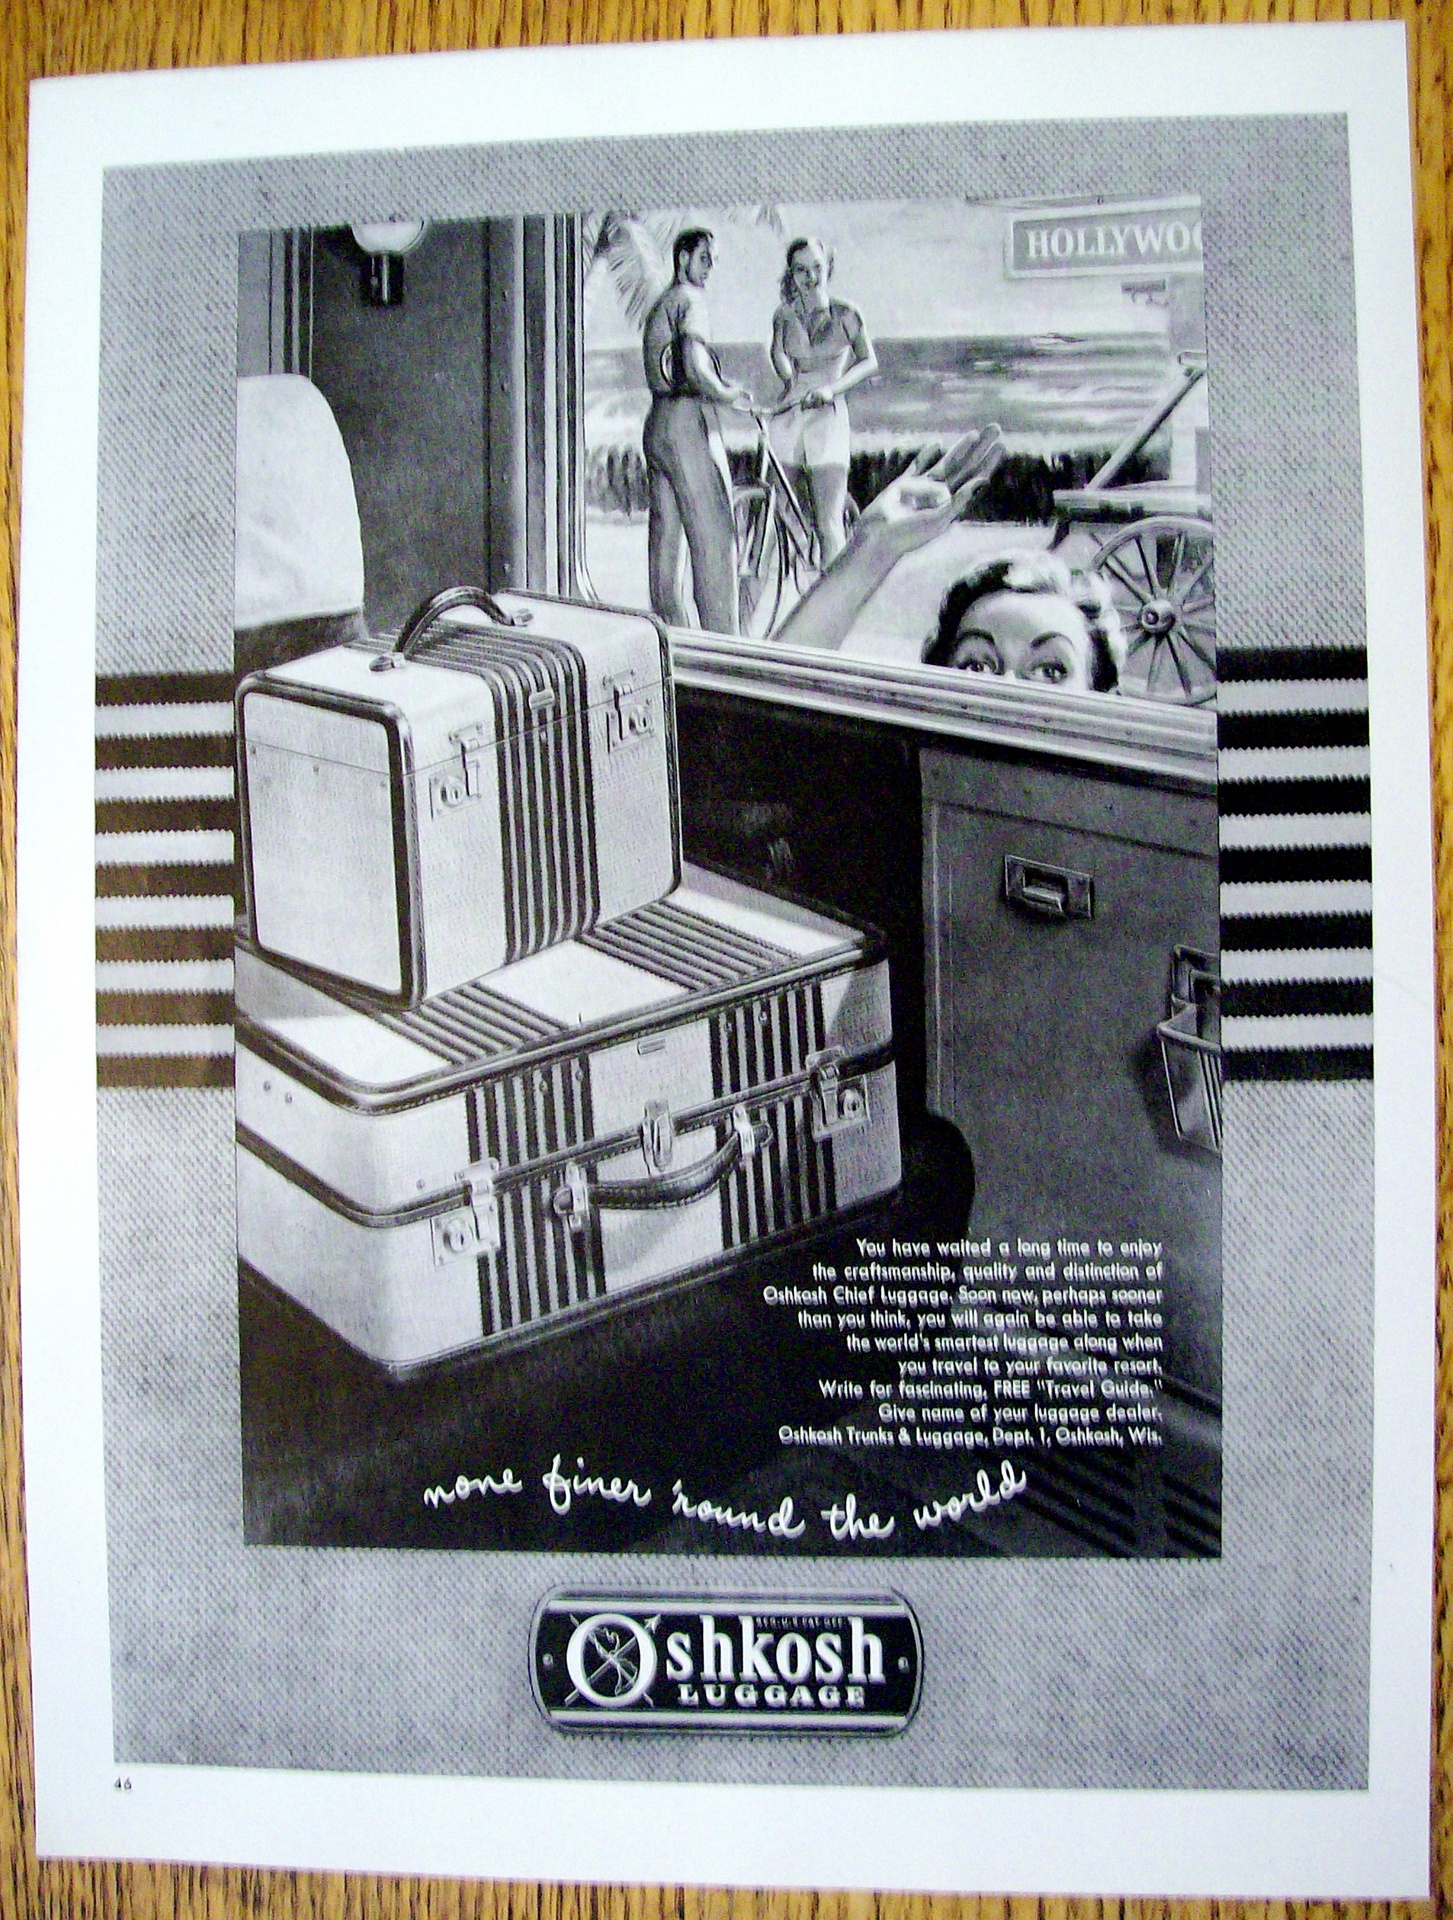 An image of a vintage 1951 Oshkosh ad showcasing travel luggage. The ad is illustrated by John C Howard.